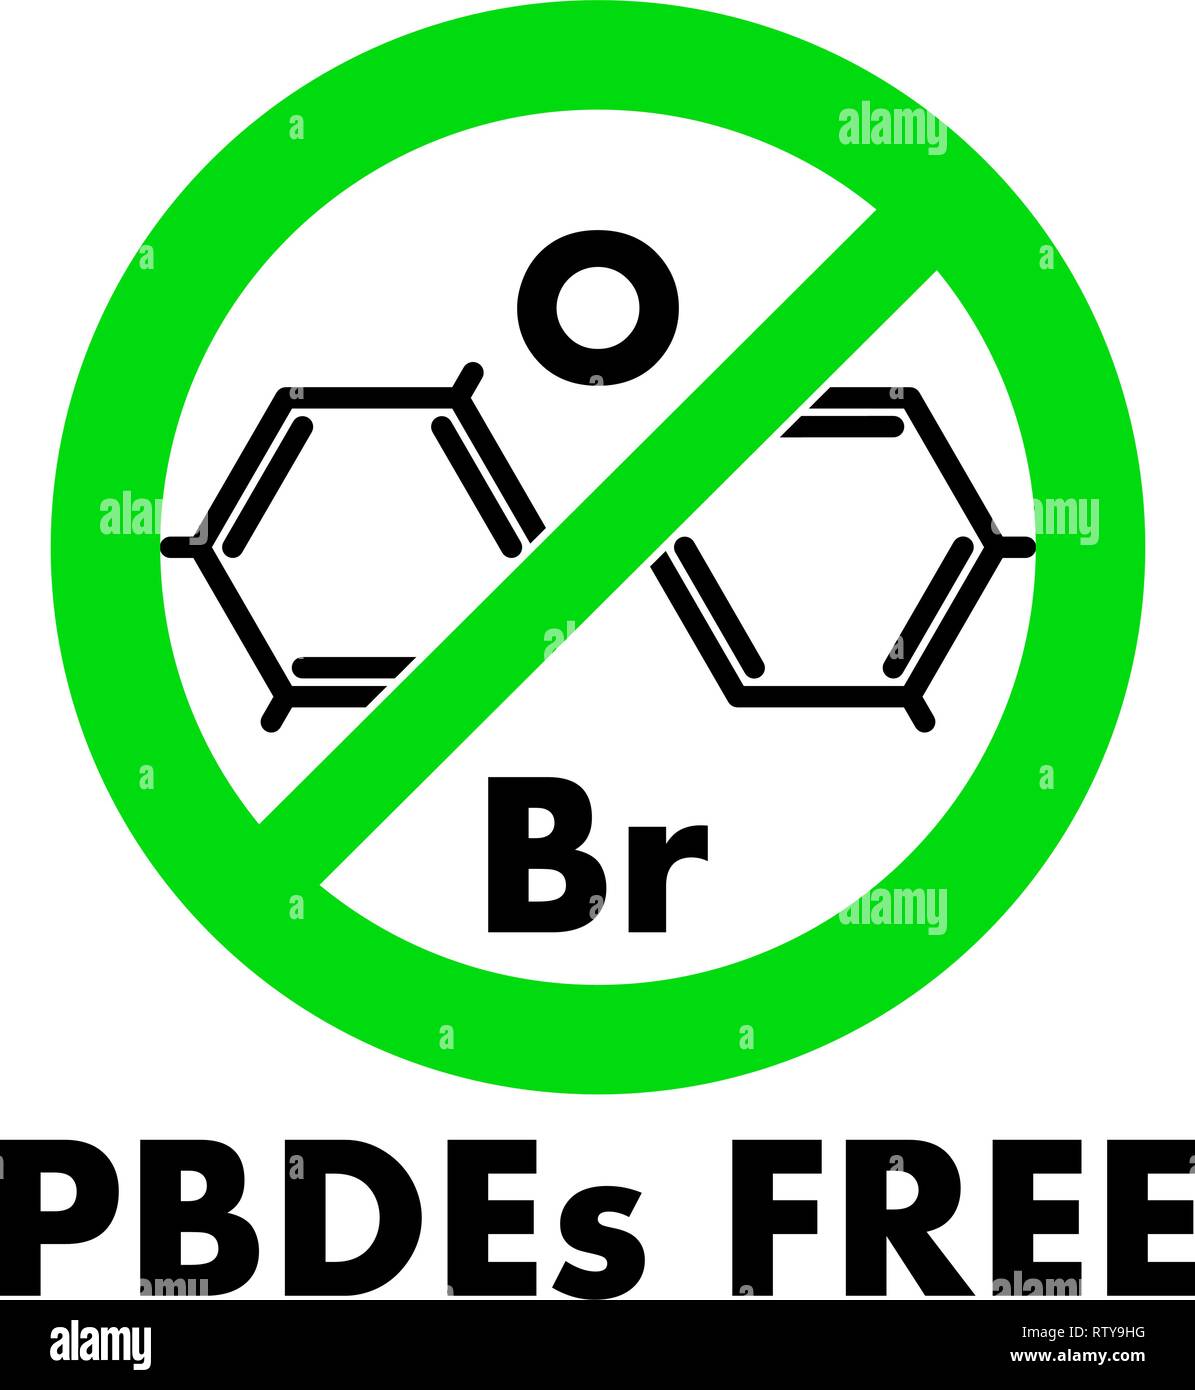 PBDEs free icon. Polybrominated diphenyl ethers chemical molecule and letters Br and O (chemical symbols for Bromine and Oxygen) in green crossed circ Stock Vector